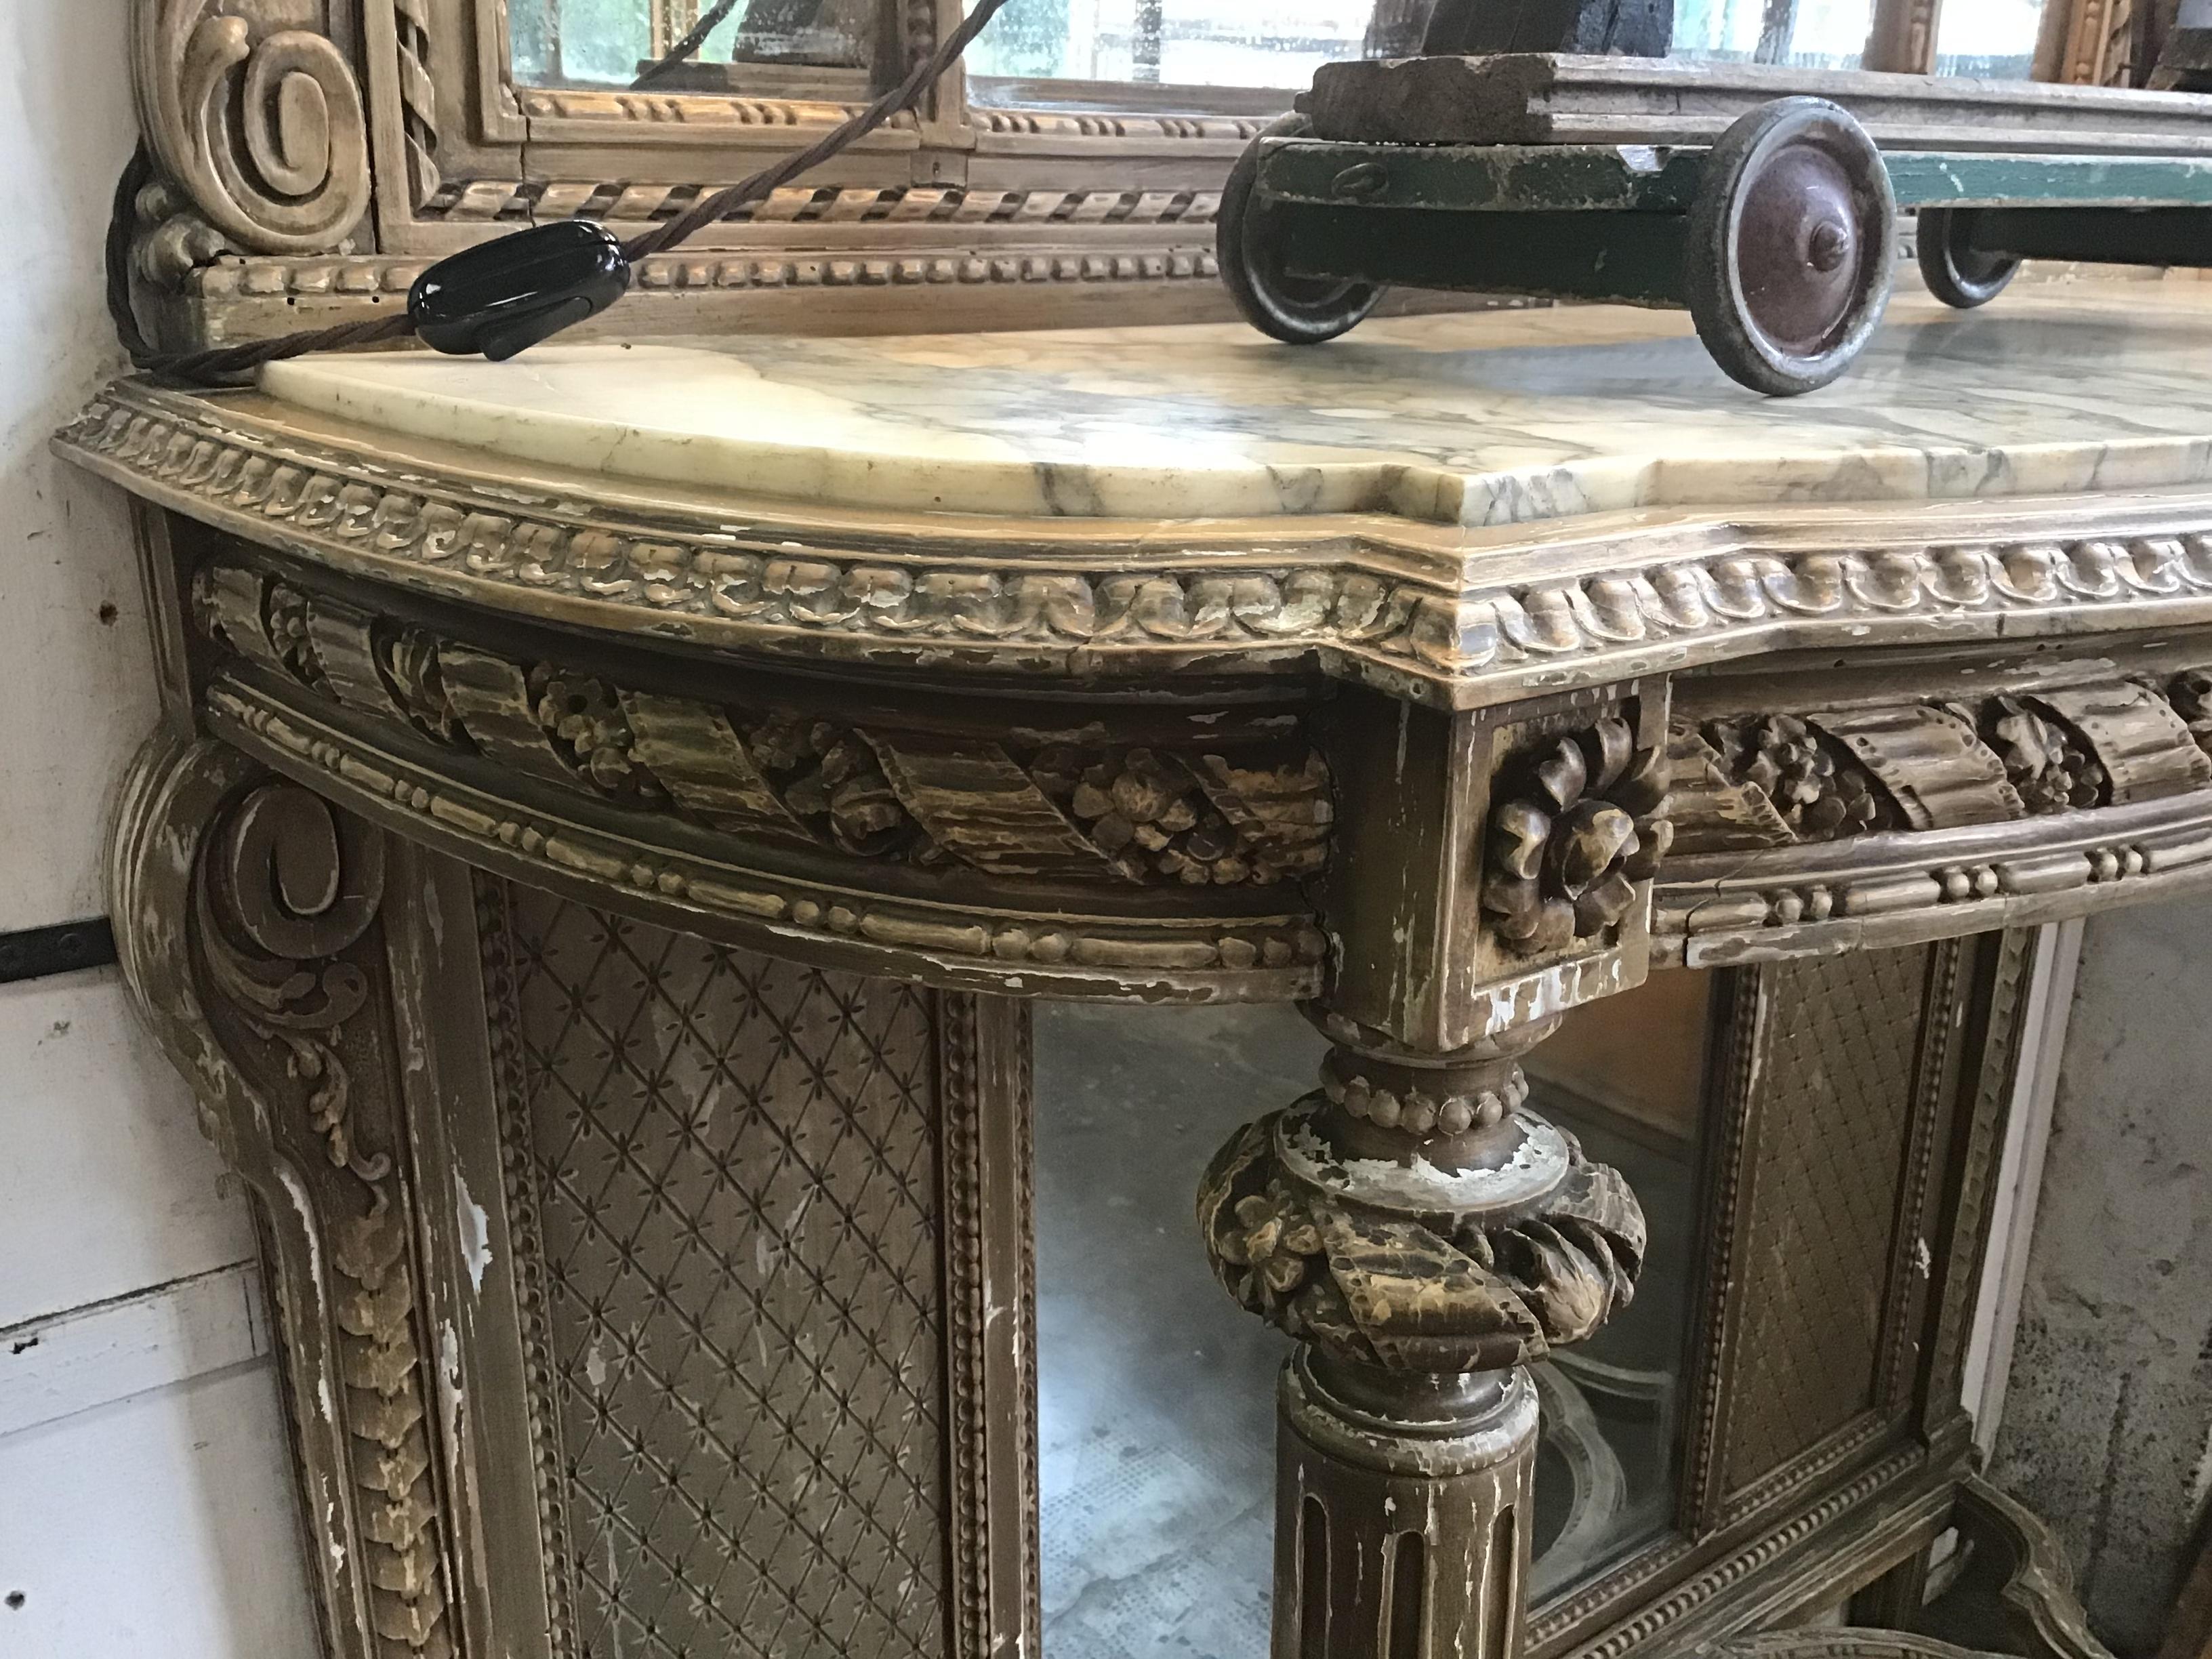 19th Century French Marble-Top Console with Giltwood Framed Mirror from 1890s (Marmor)